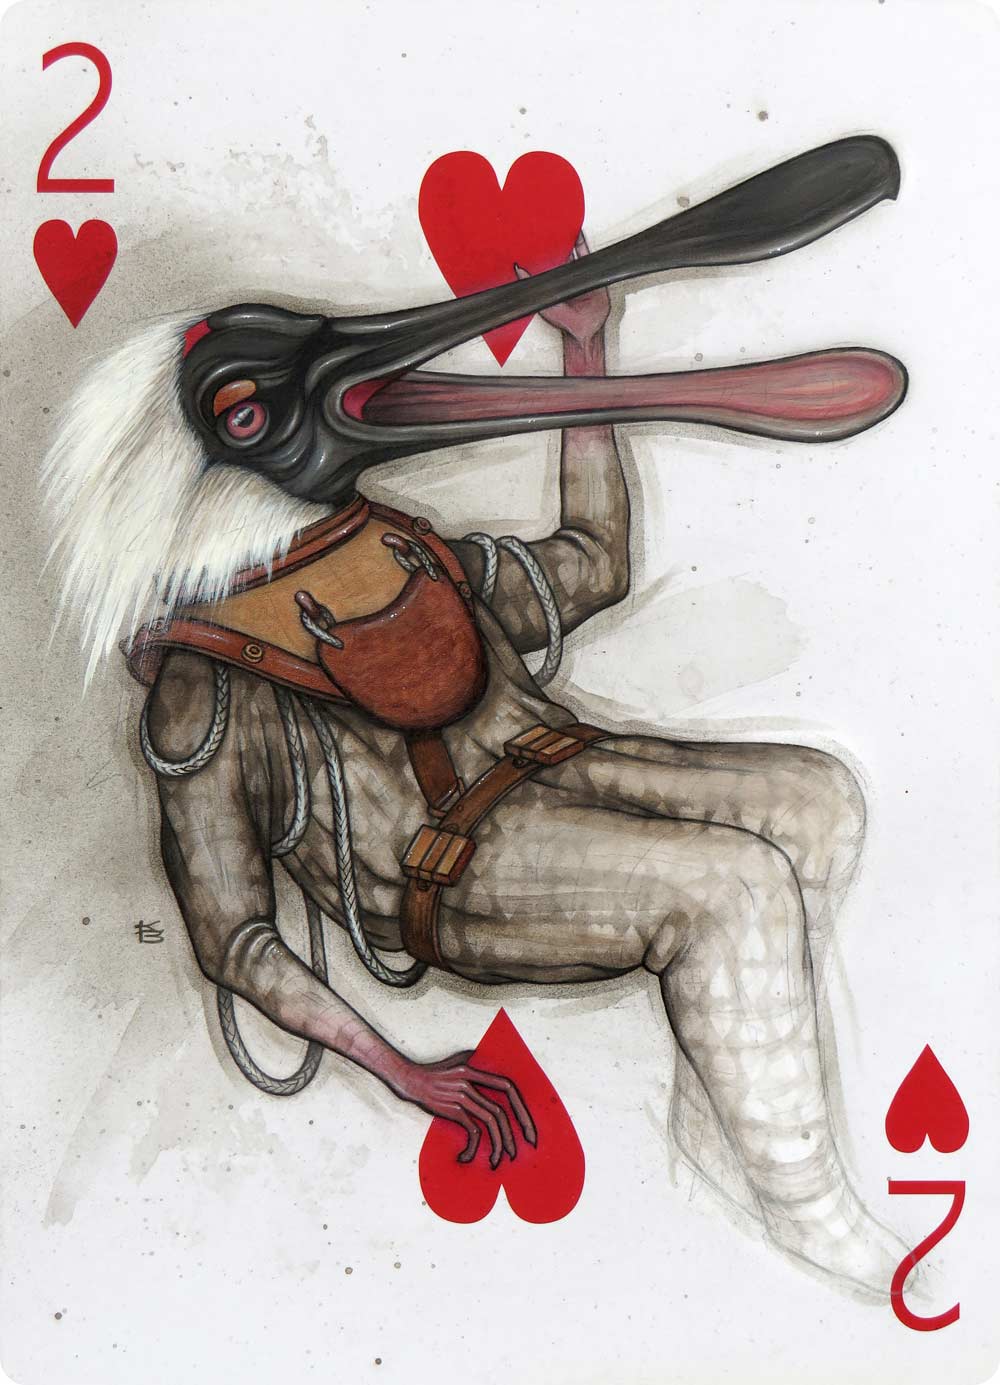 A spoonbill in a deep sea diving suit painted on the 2 of hearts card